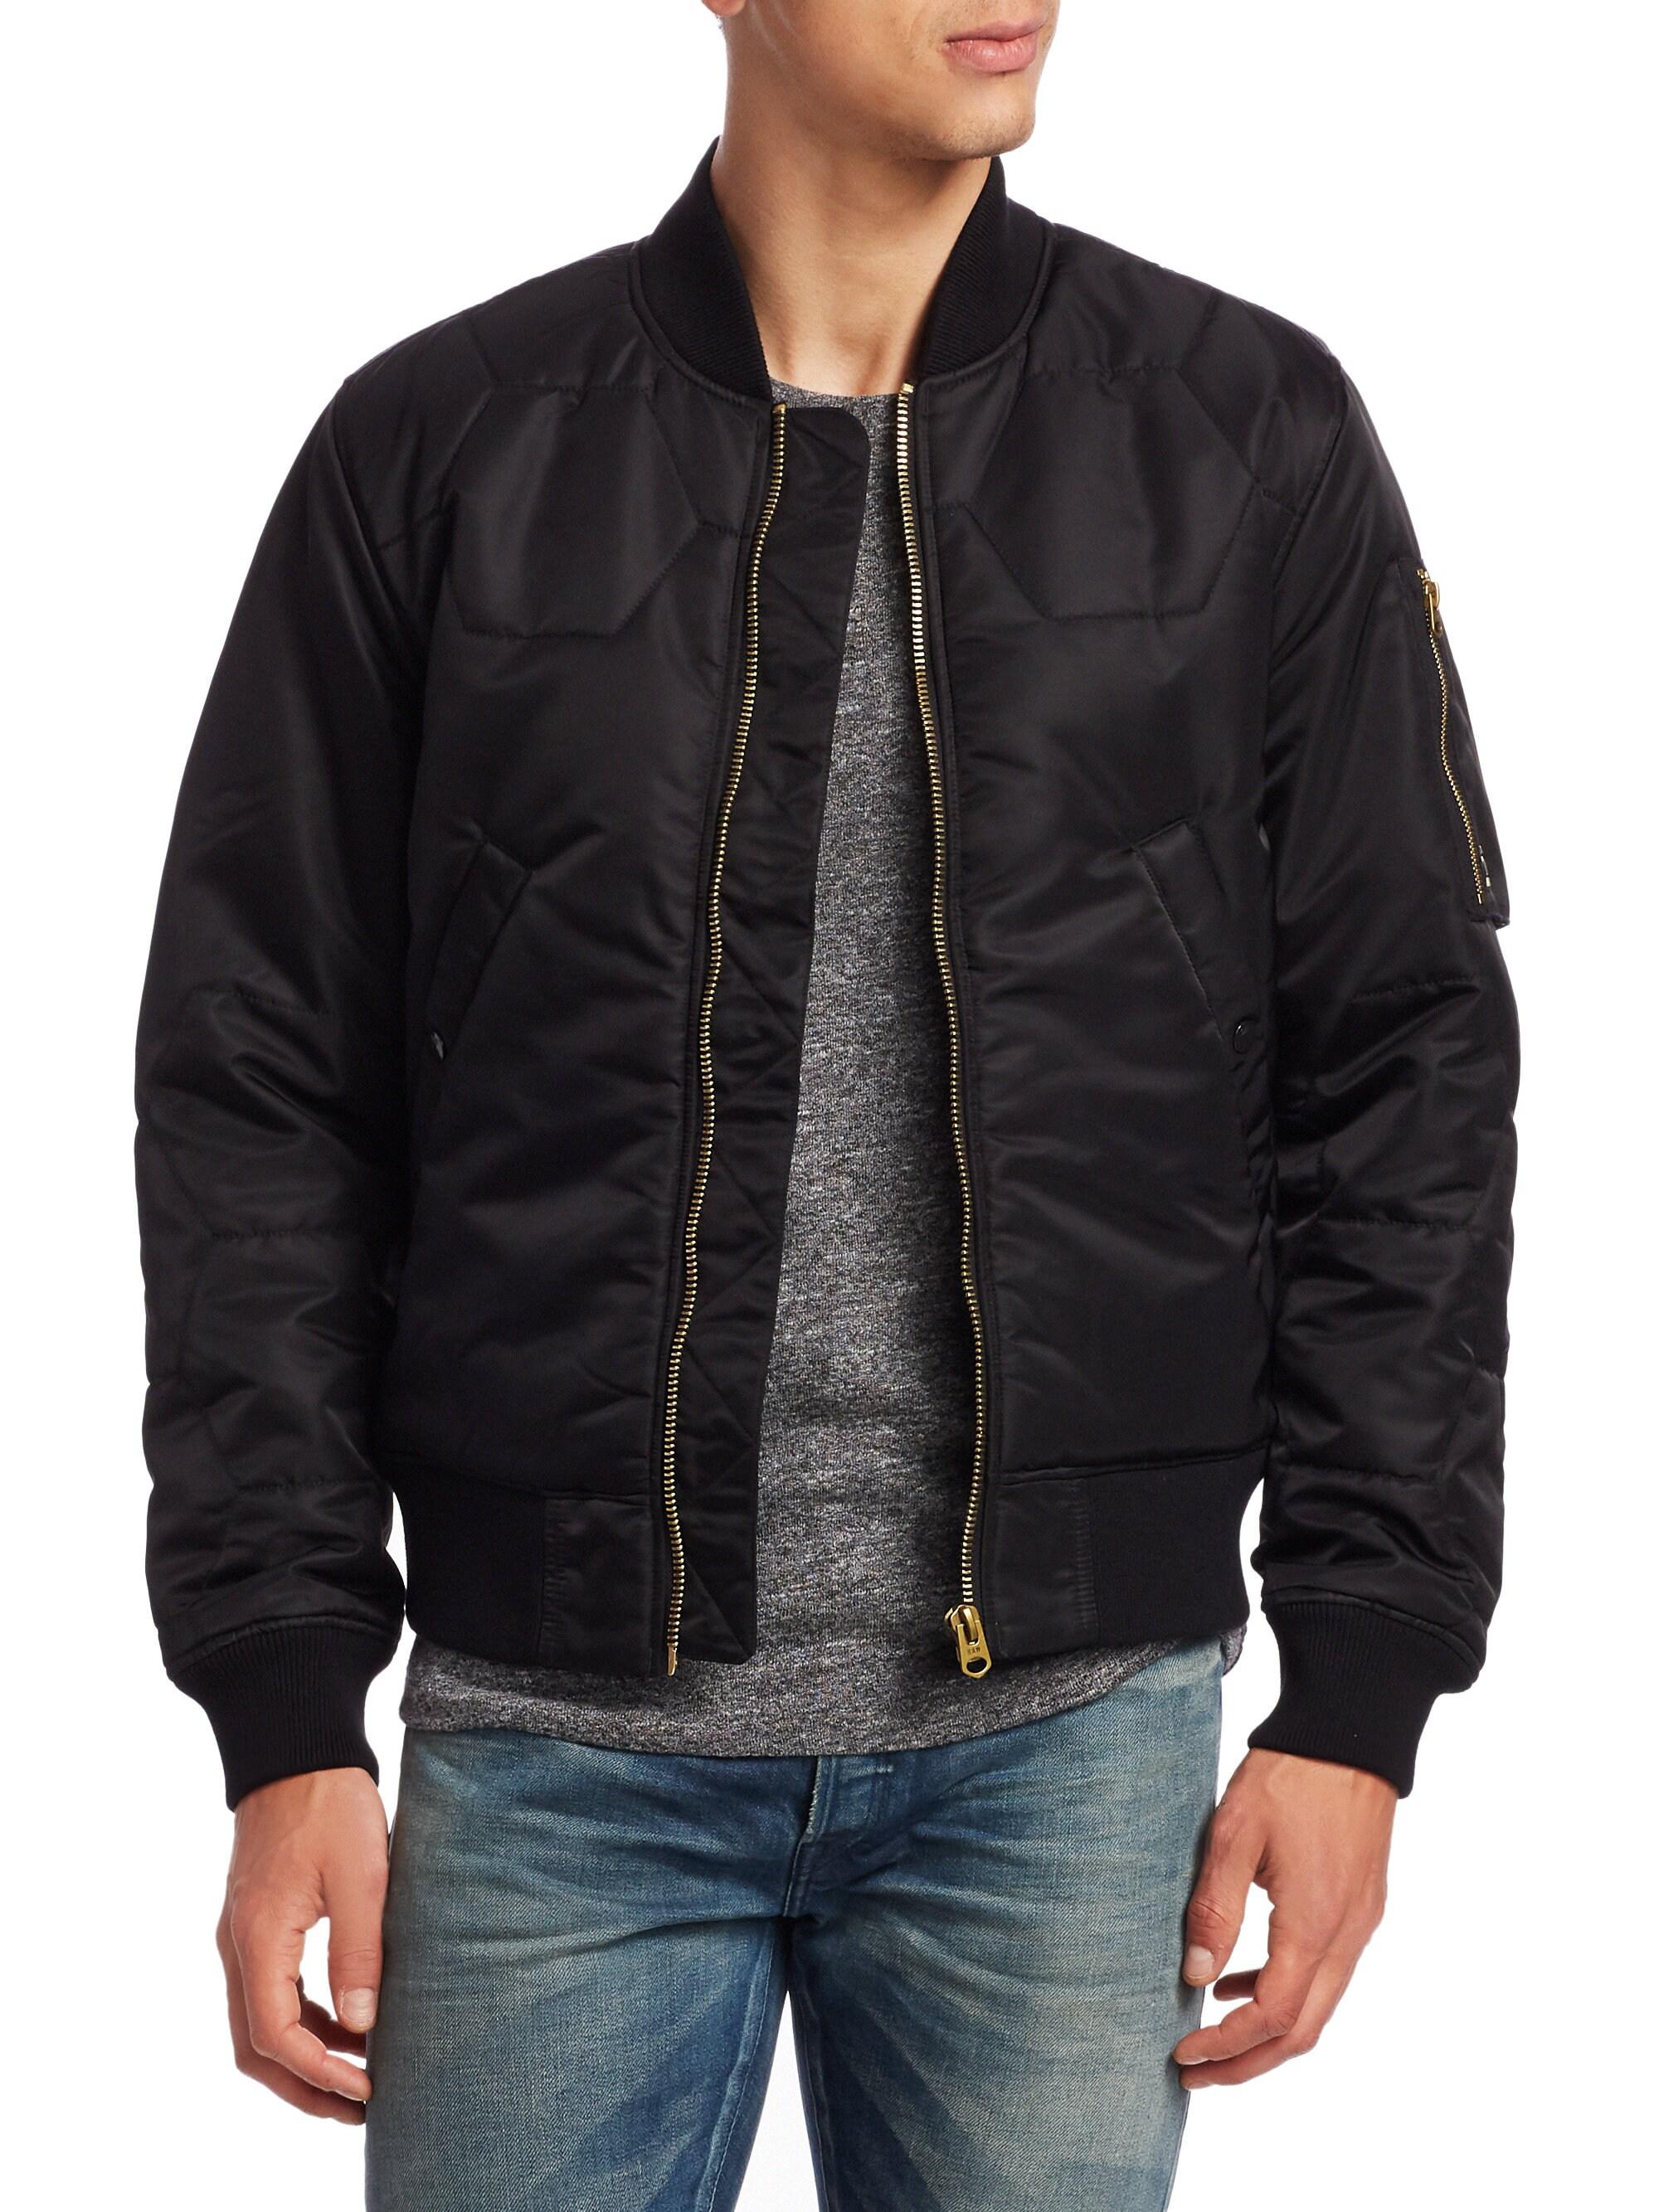 G-Star RAW Vodan Quilted Bomber Jacket in Black for Men - Lyst